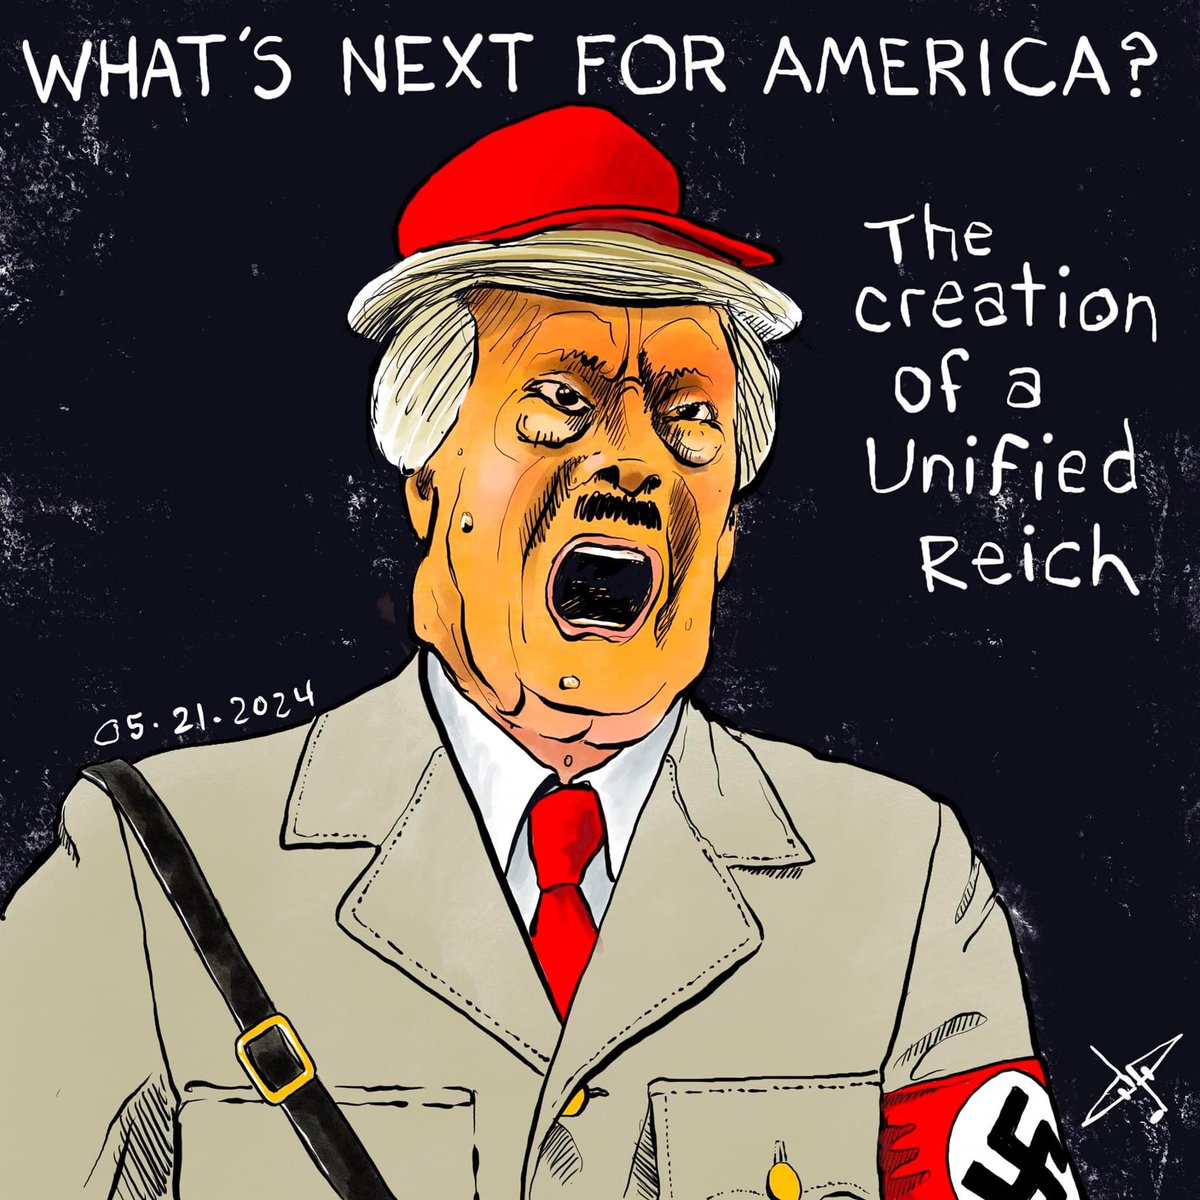 Traitor trump has pulled the ad in which he repeatedly referred to creating a “UNIFIED REICH” due to public backlash, but the cat is out of the bag, his fascistic intentions for our nation are exposed. This must not be forgotten or forgiven. 😡